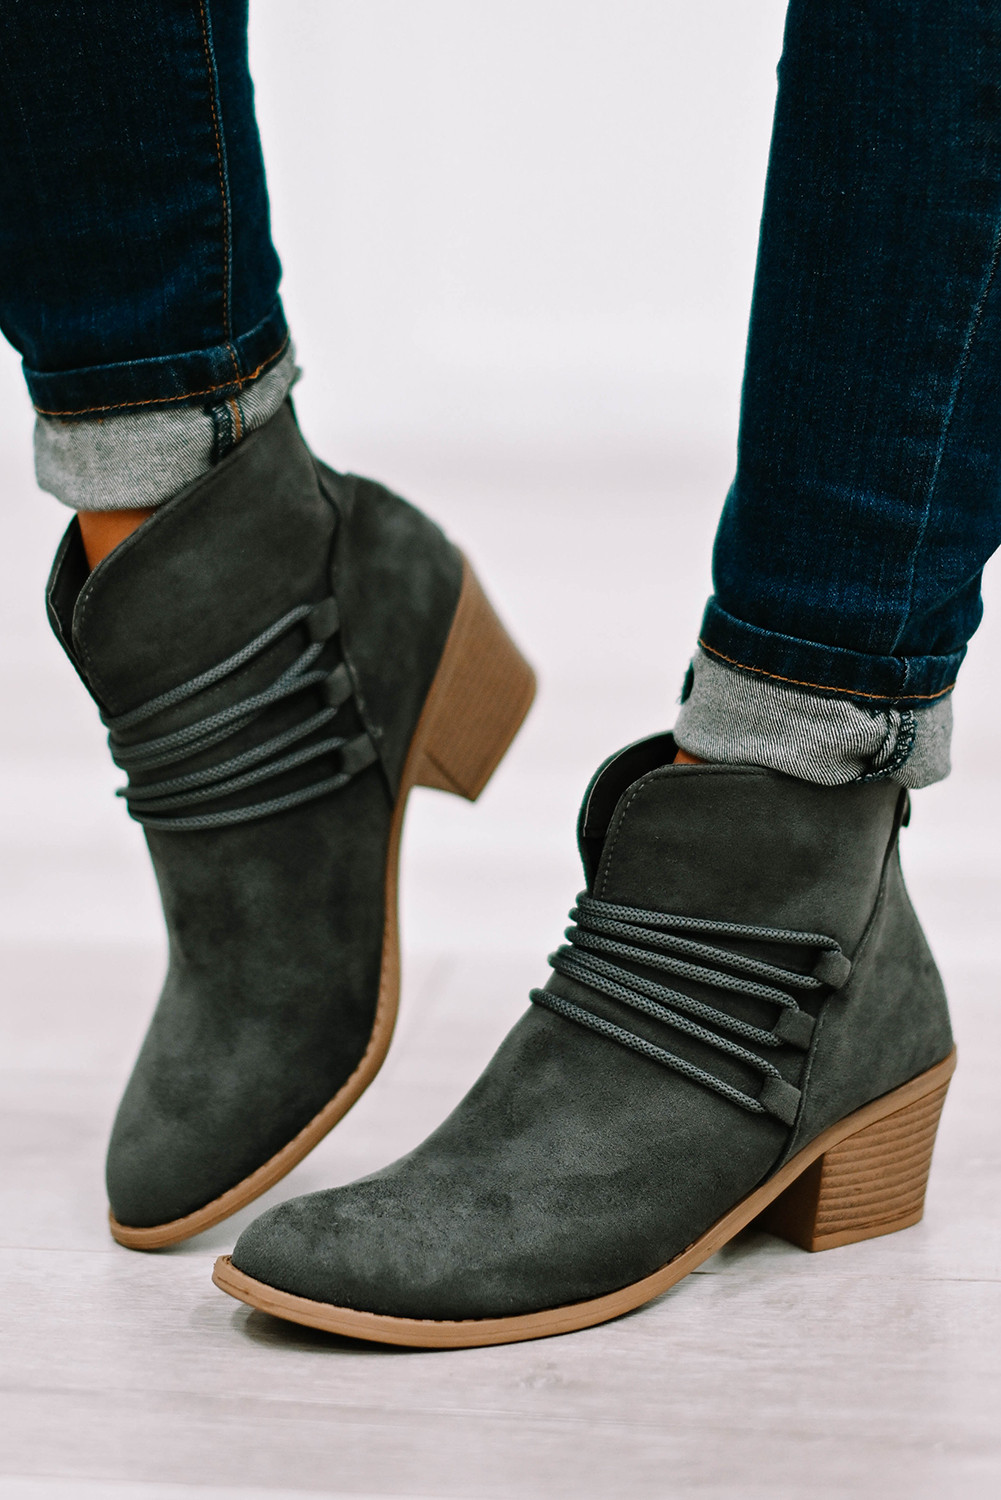 How To Wear Ankle Boots With Jeans